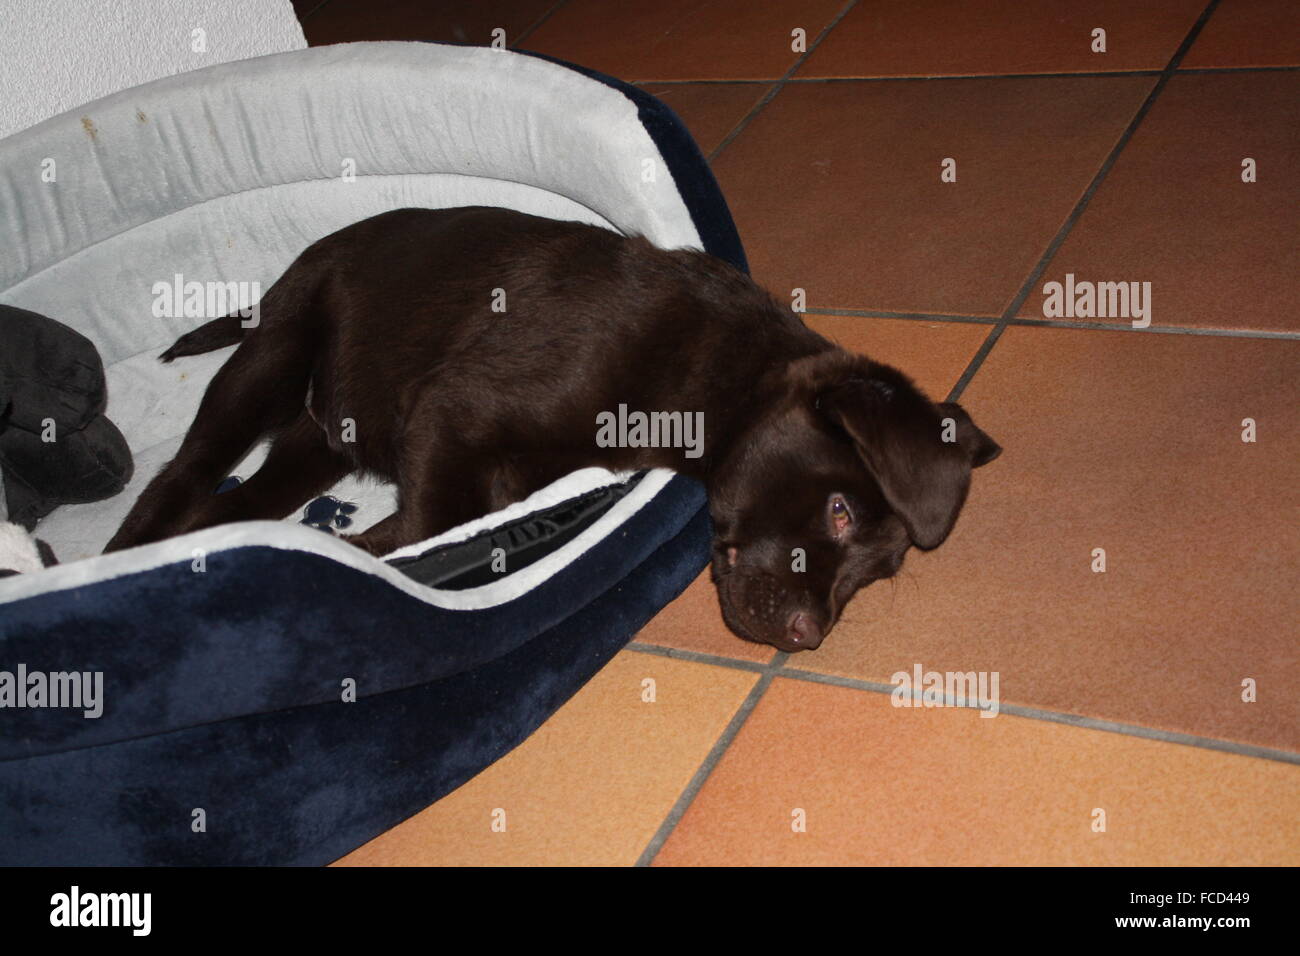 Cute Puppy Dog Resting Stock Photo